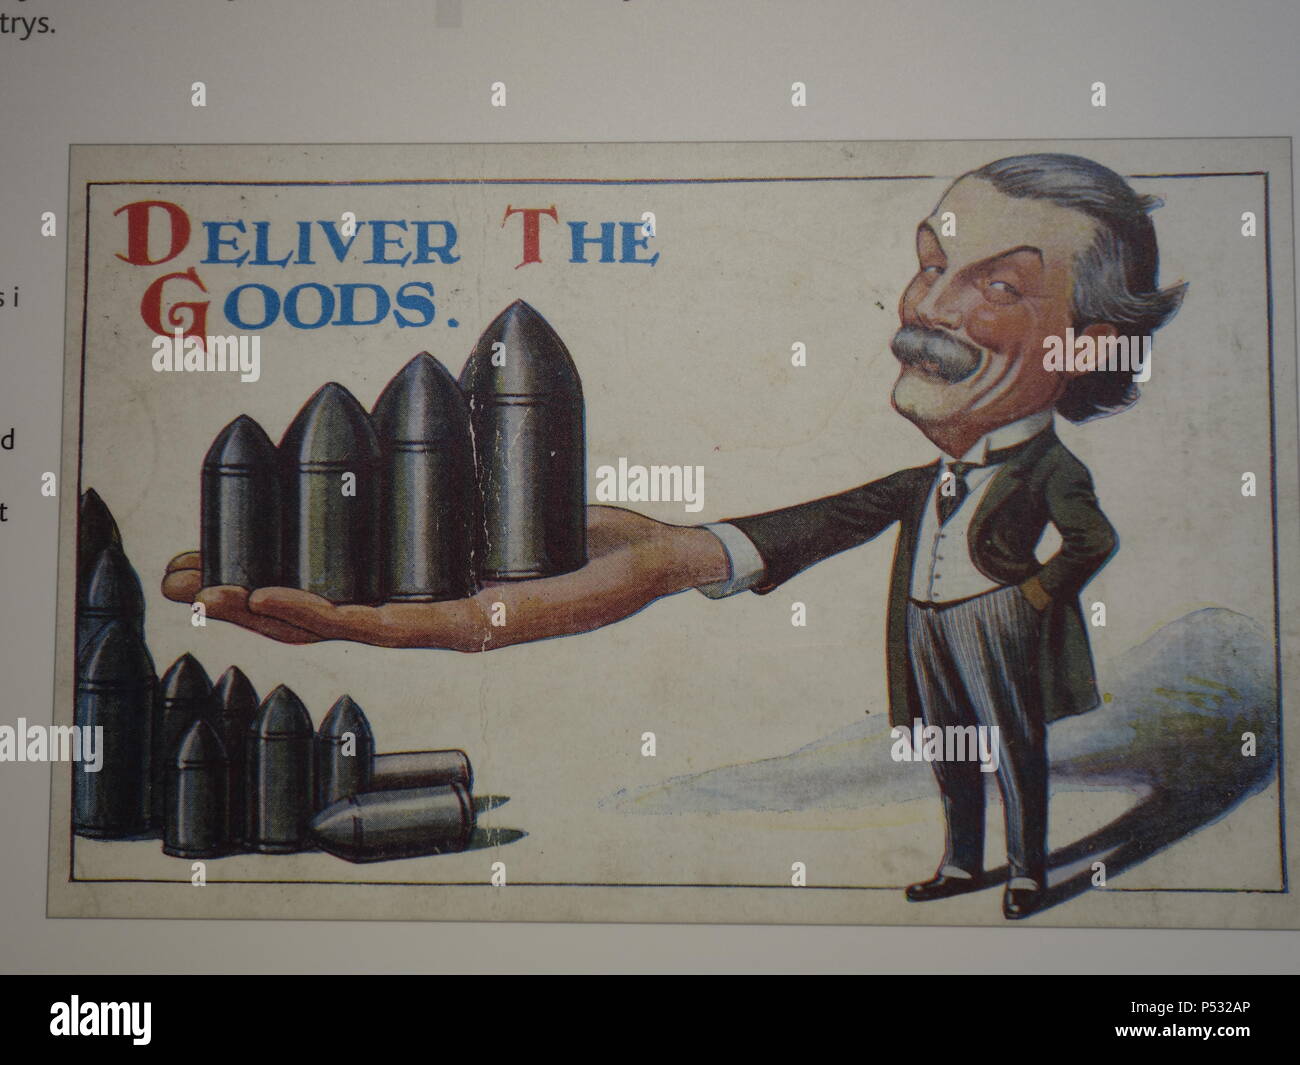 Lloyd George cartoon vintage 'deliver the goods' Stock Photo